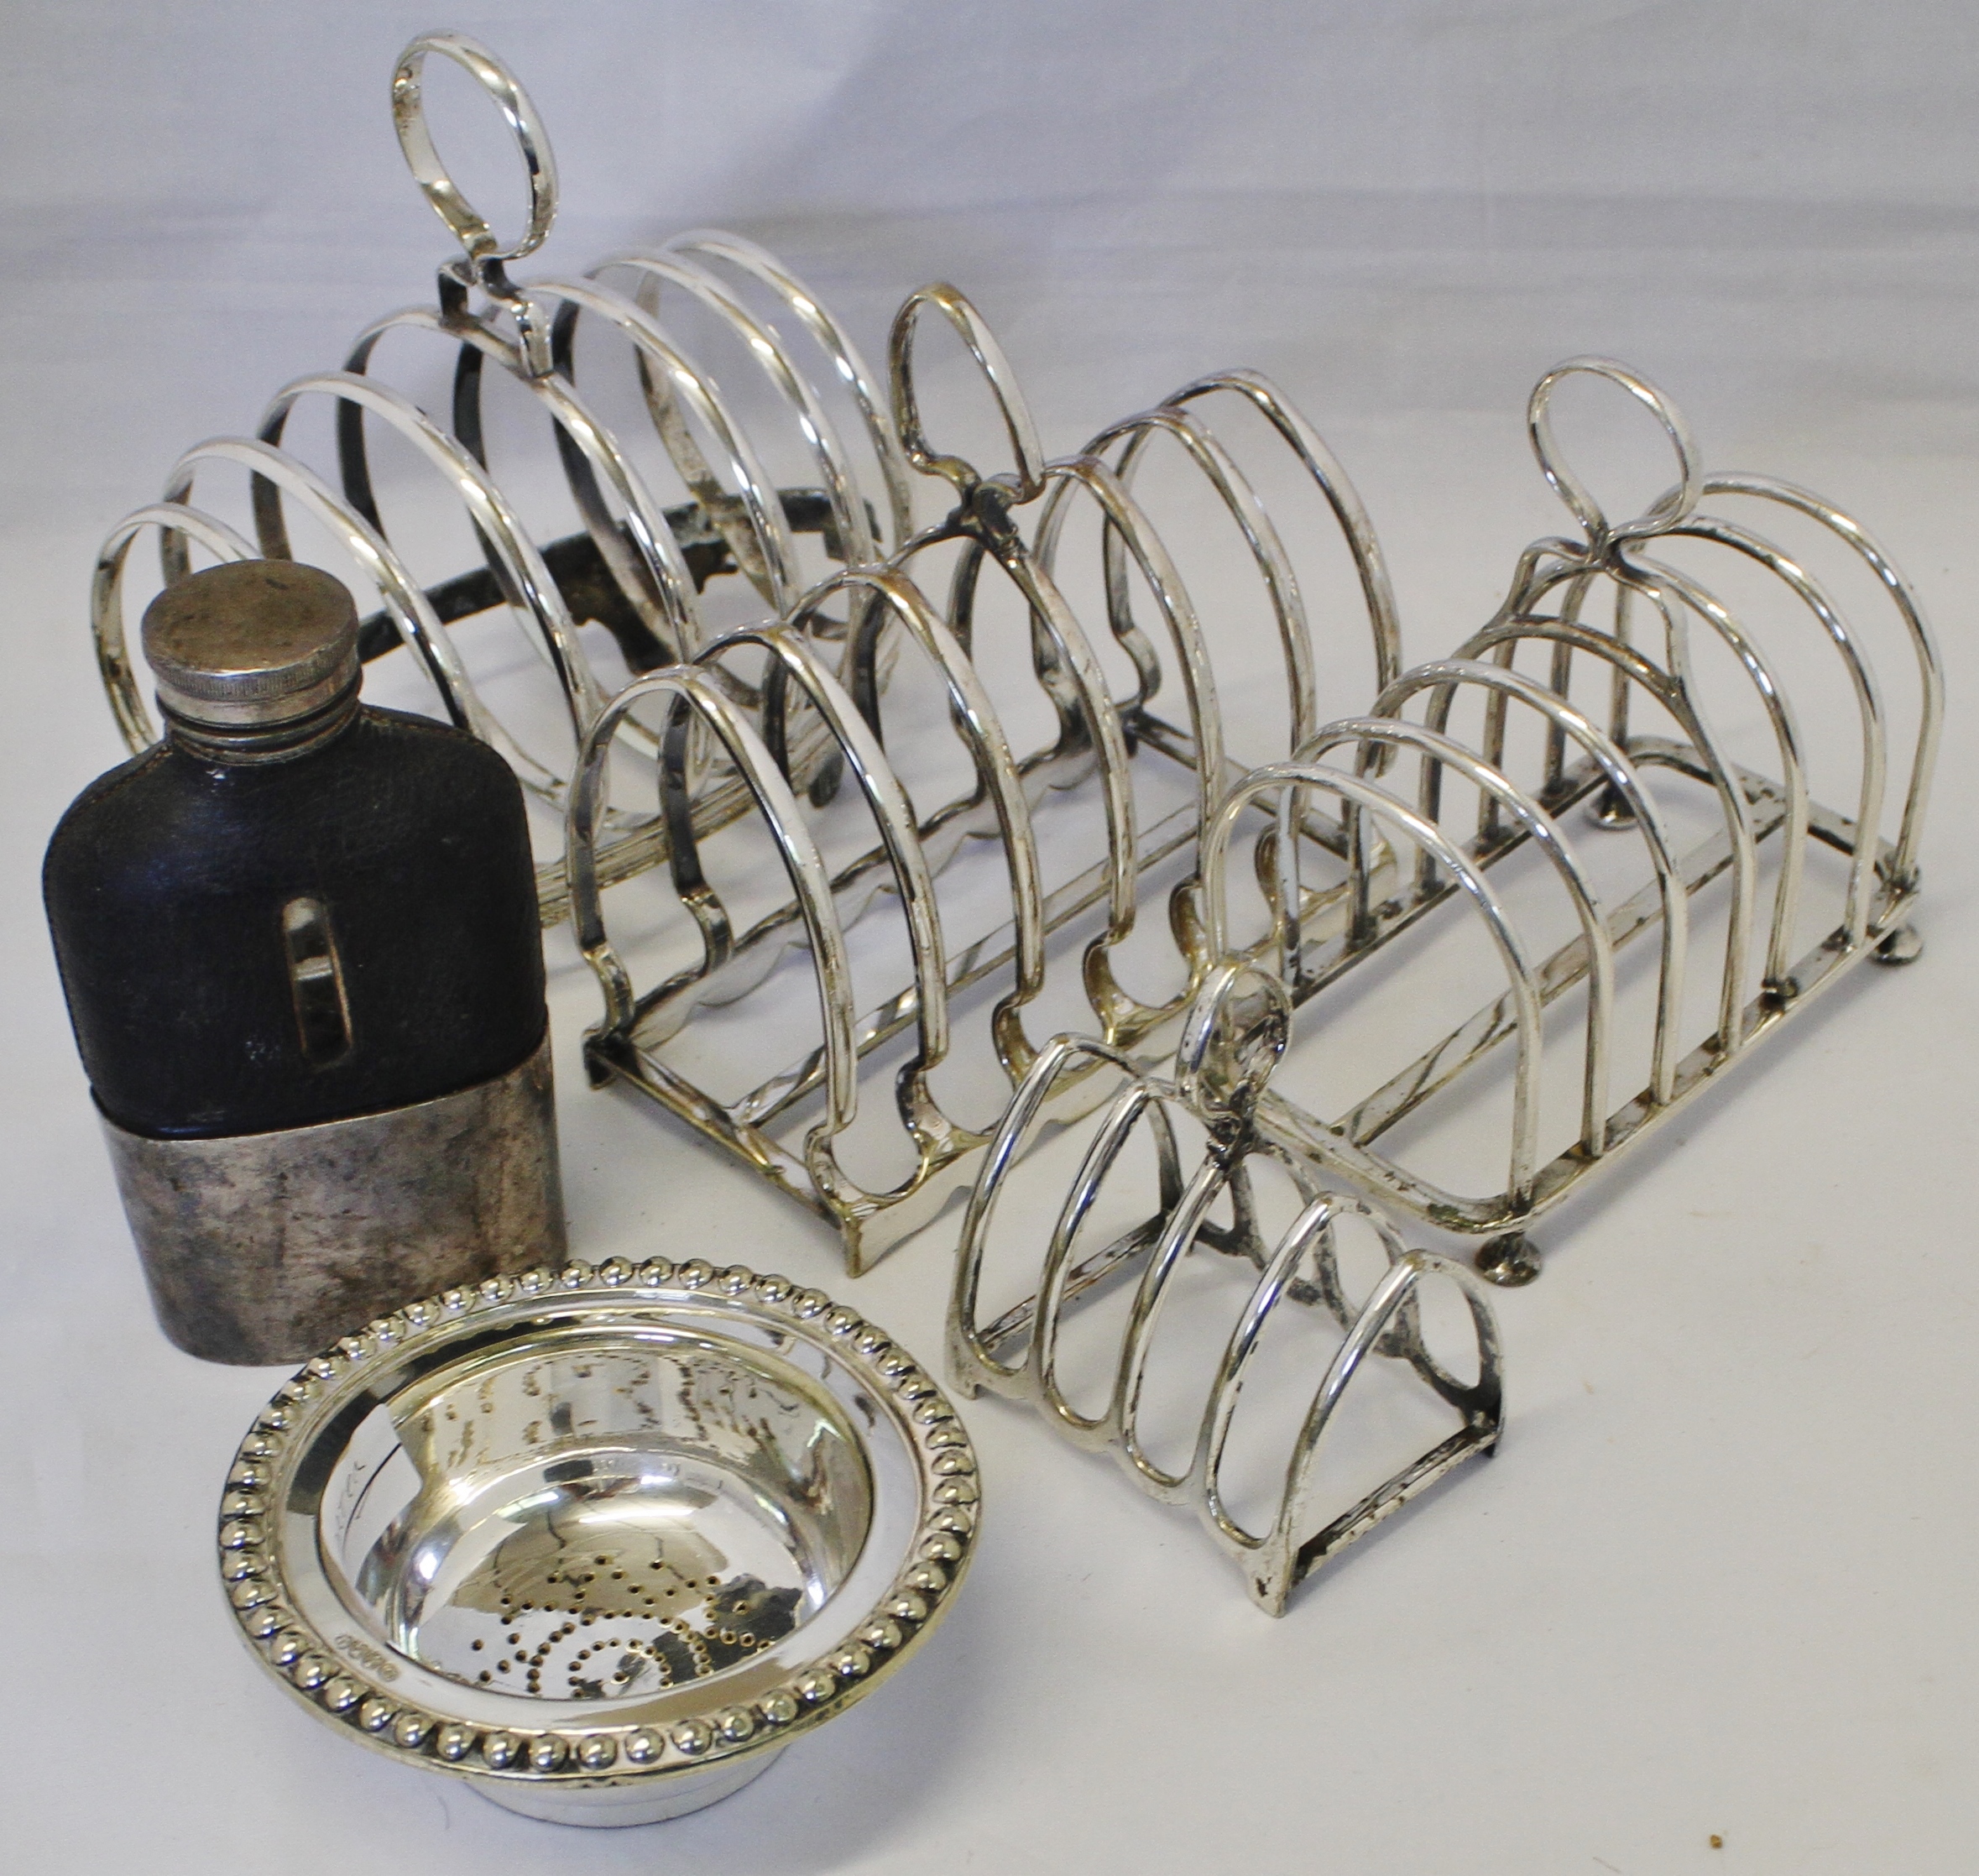 Mixed Lot: four various electroplated toast racks, together with a part wine funnel and clear